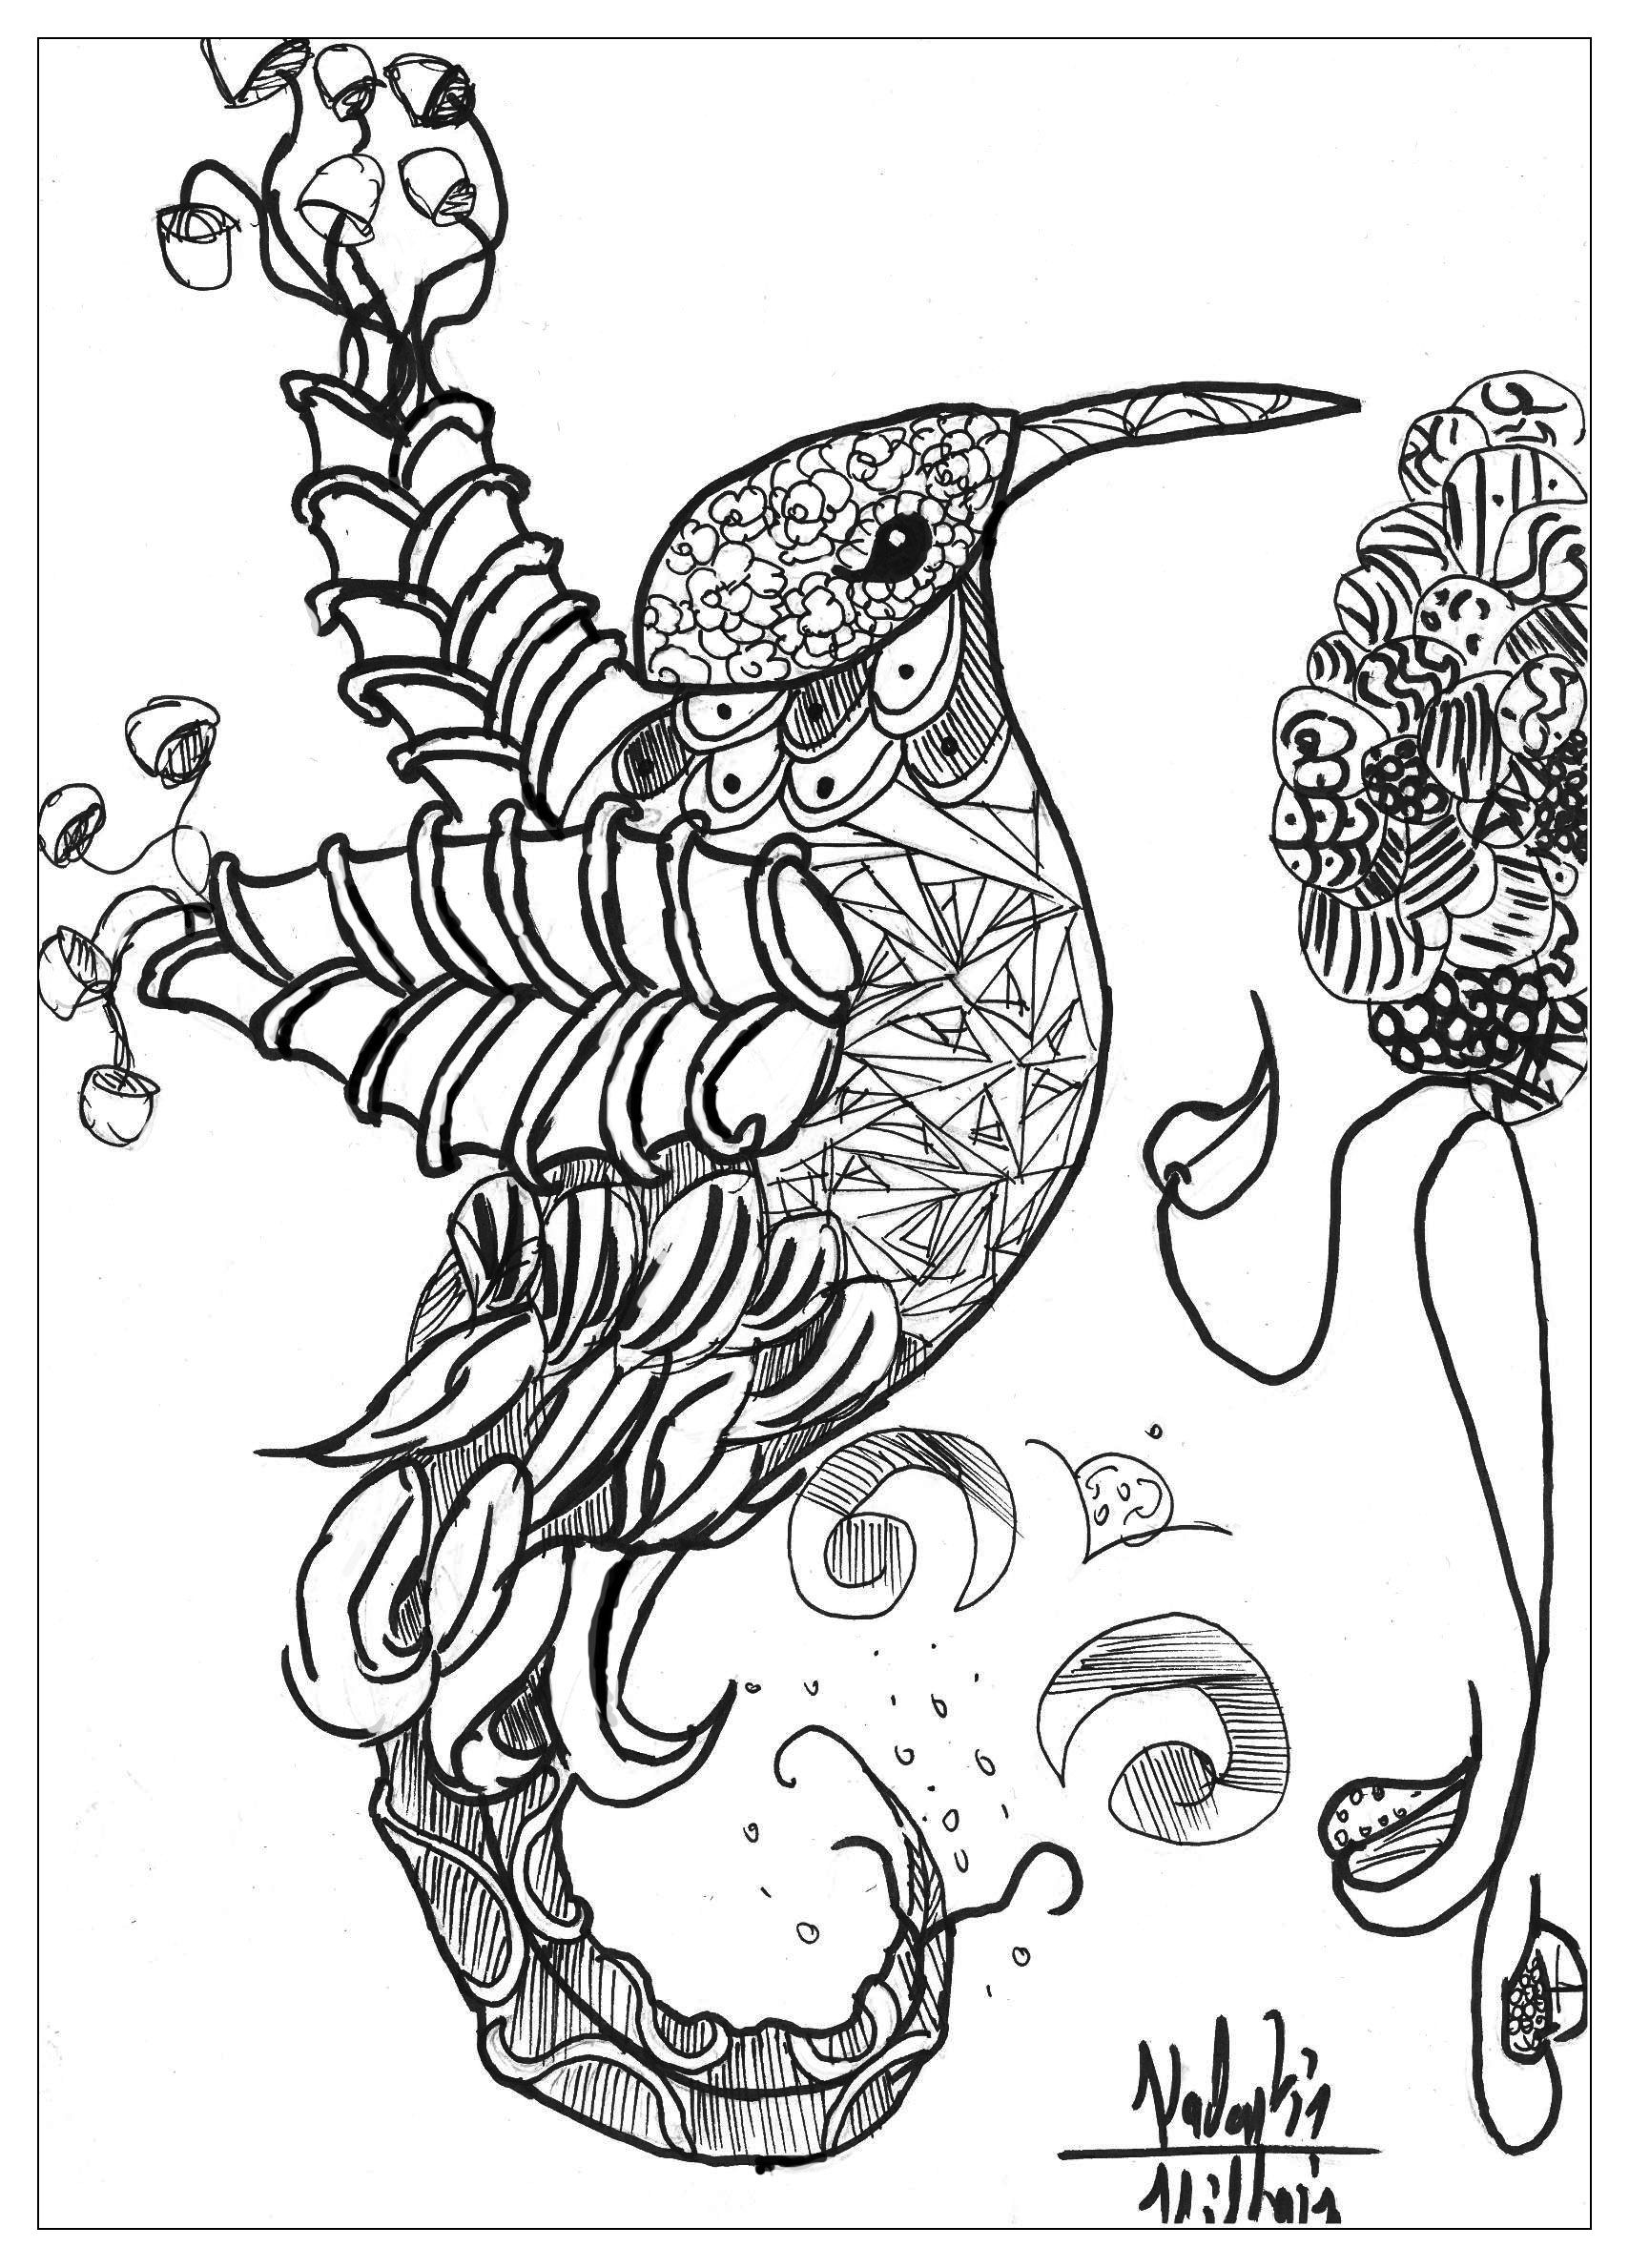 Free Animal Design Coloring Pages Download Free Animal Design Coloring Pages Png Images Free